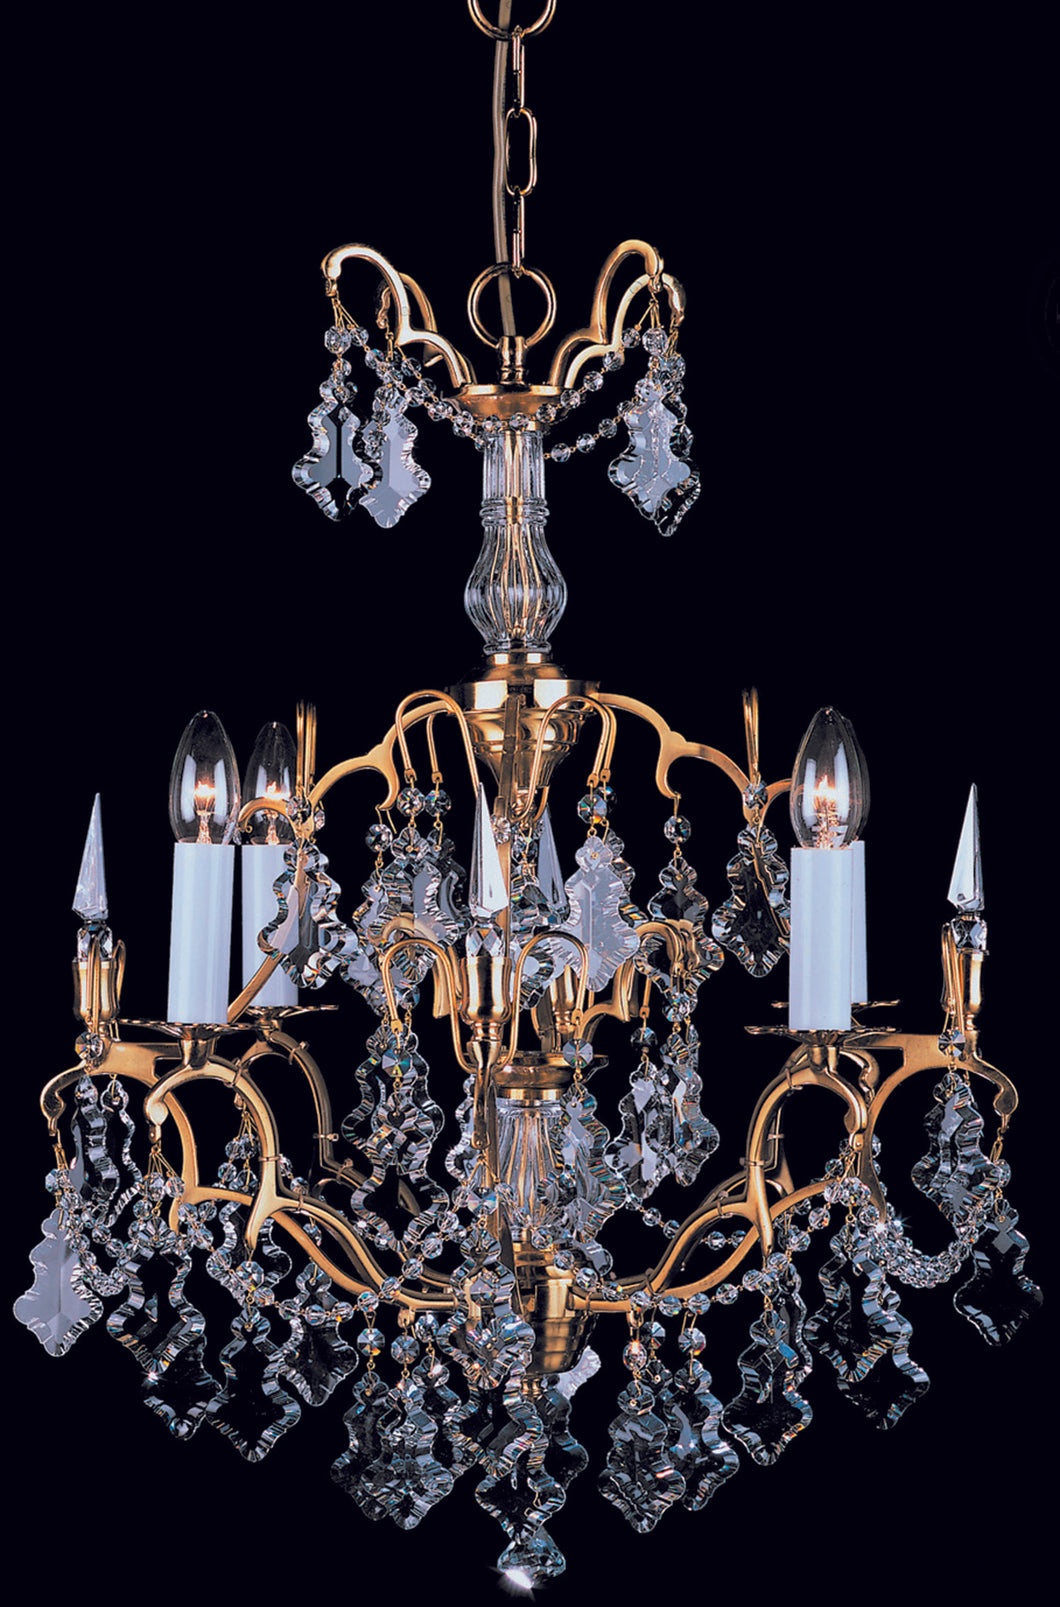 Hula Crystal Chandelier S/M/L/XL Antique Bronze/French Gold